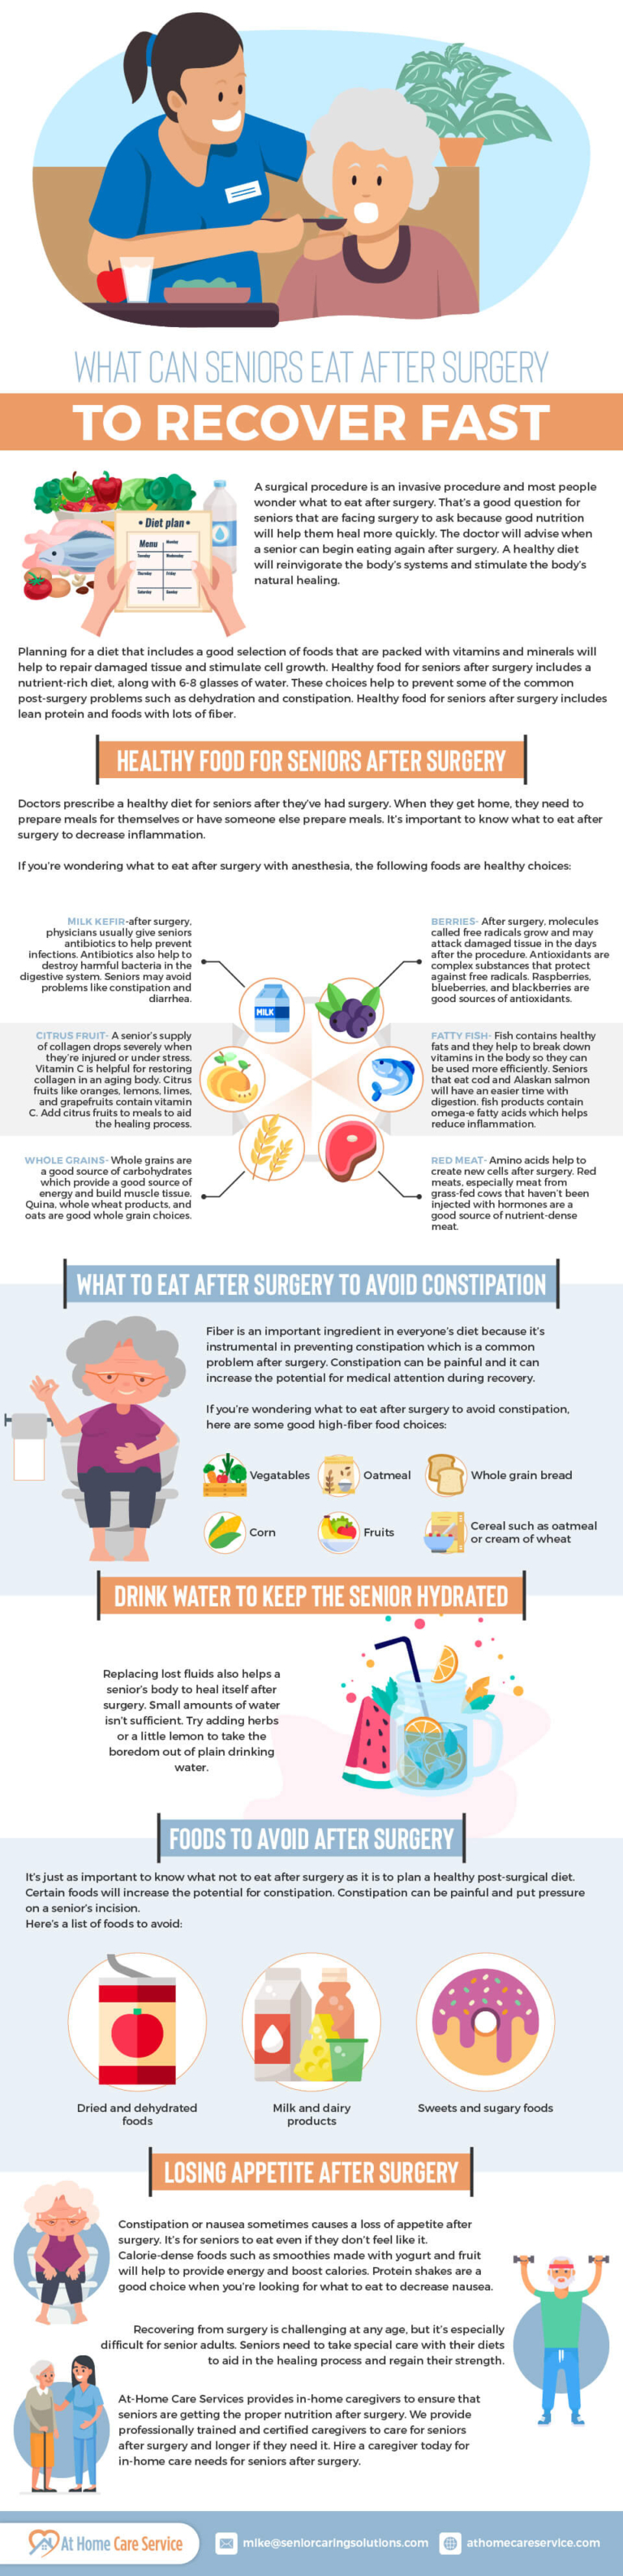 What Can Seniors Eat After Surgery to Recover Fast #infographic